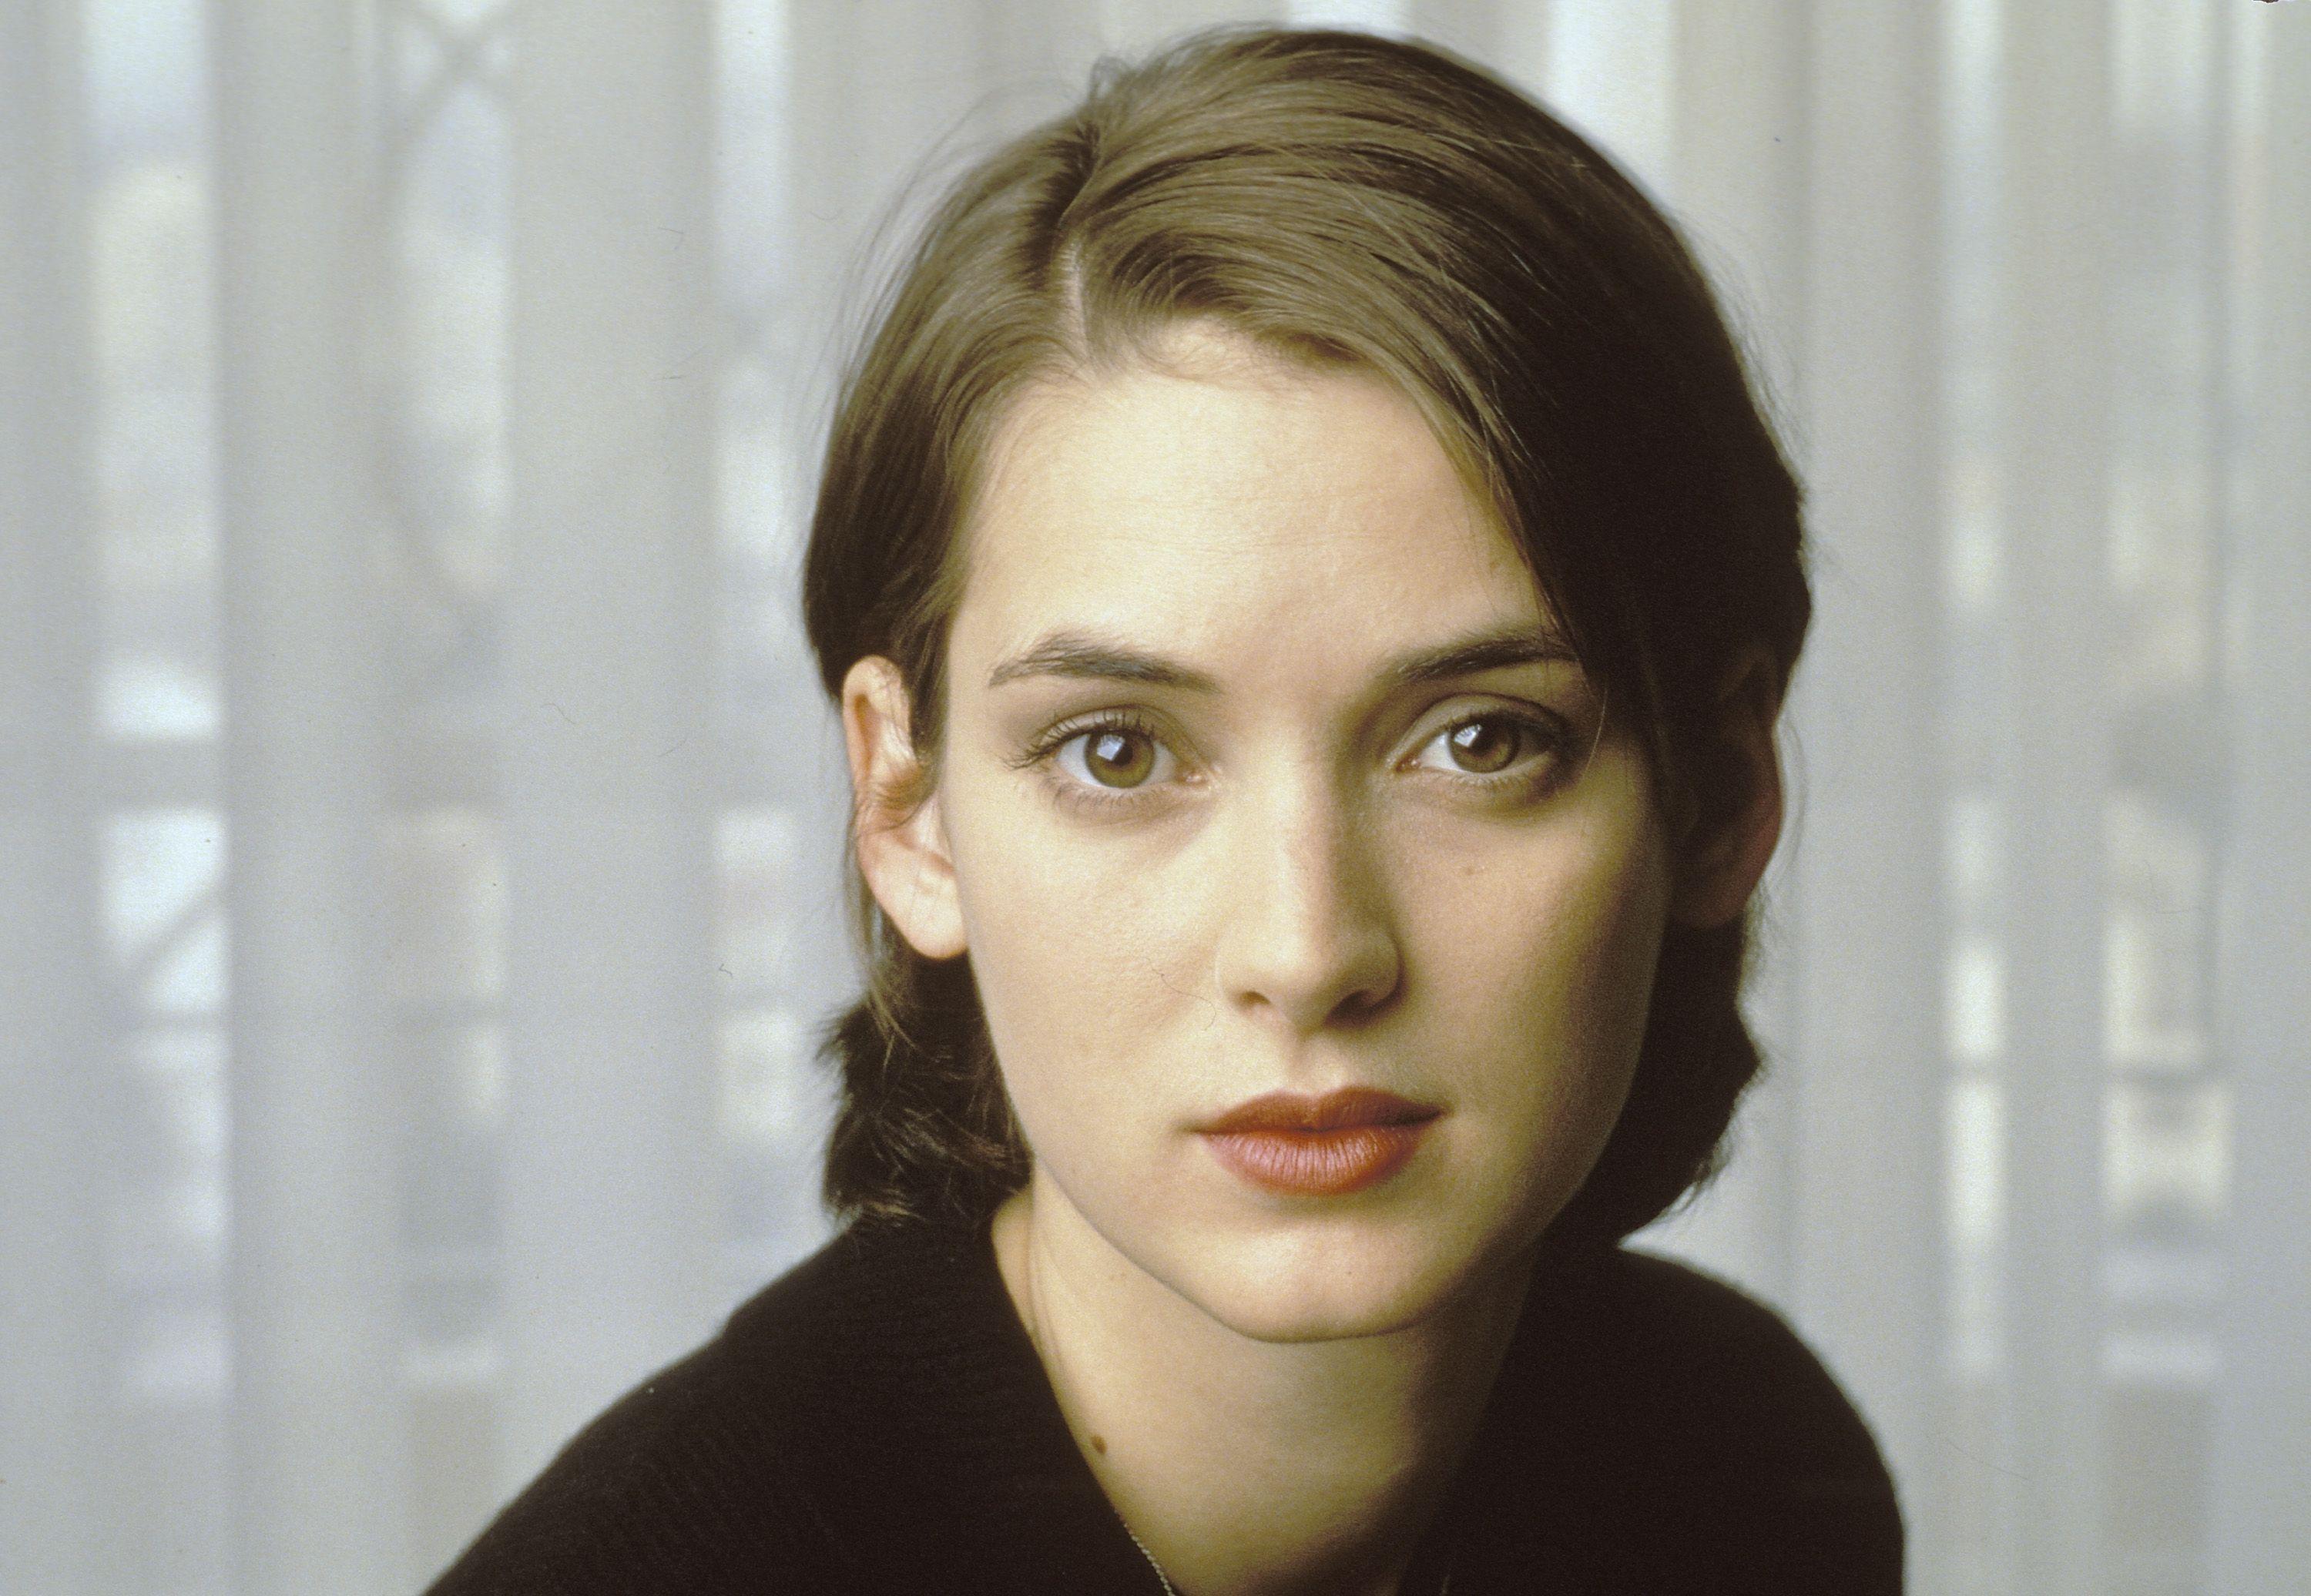 Winona Ryder Wallpaper Image Photo Picture Background